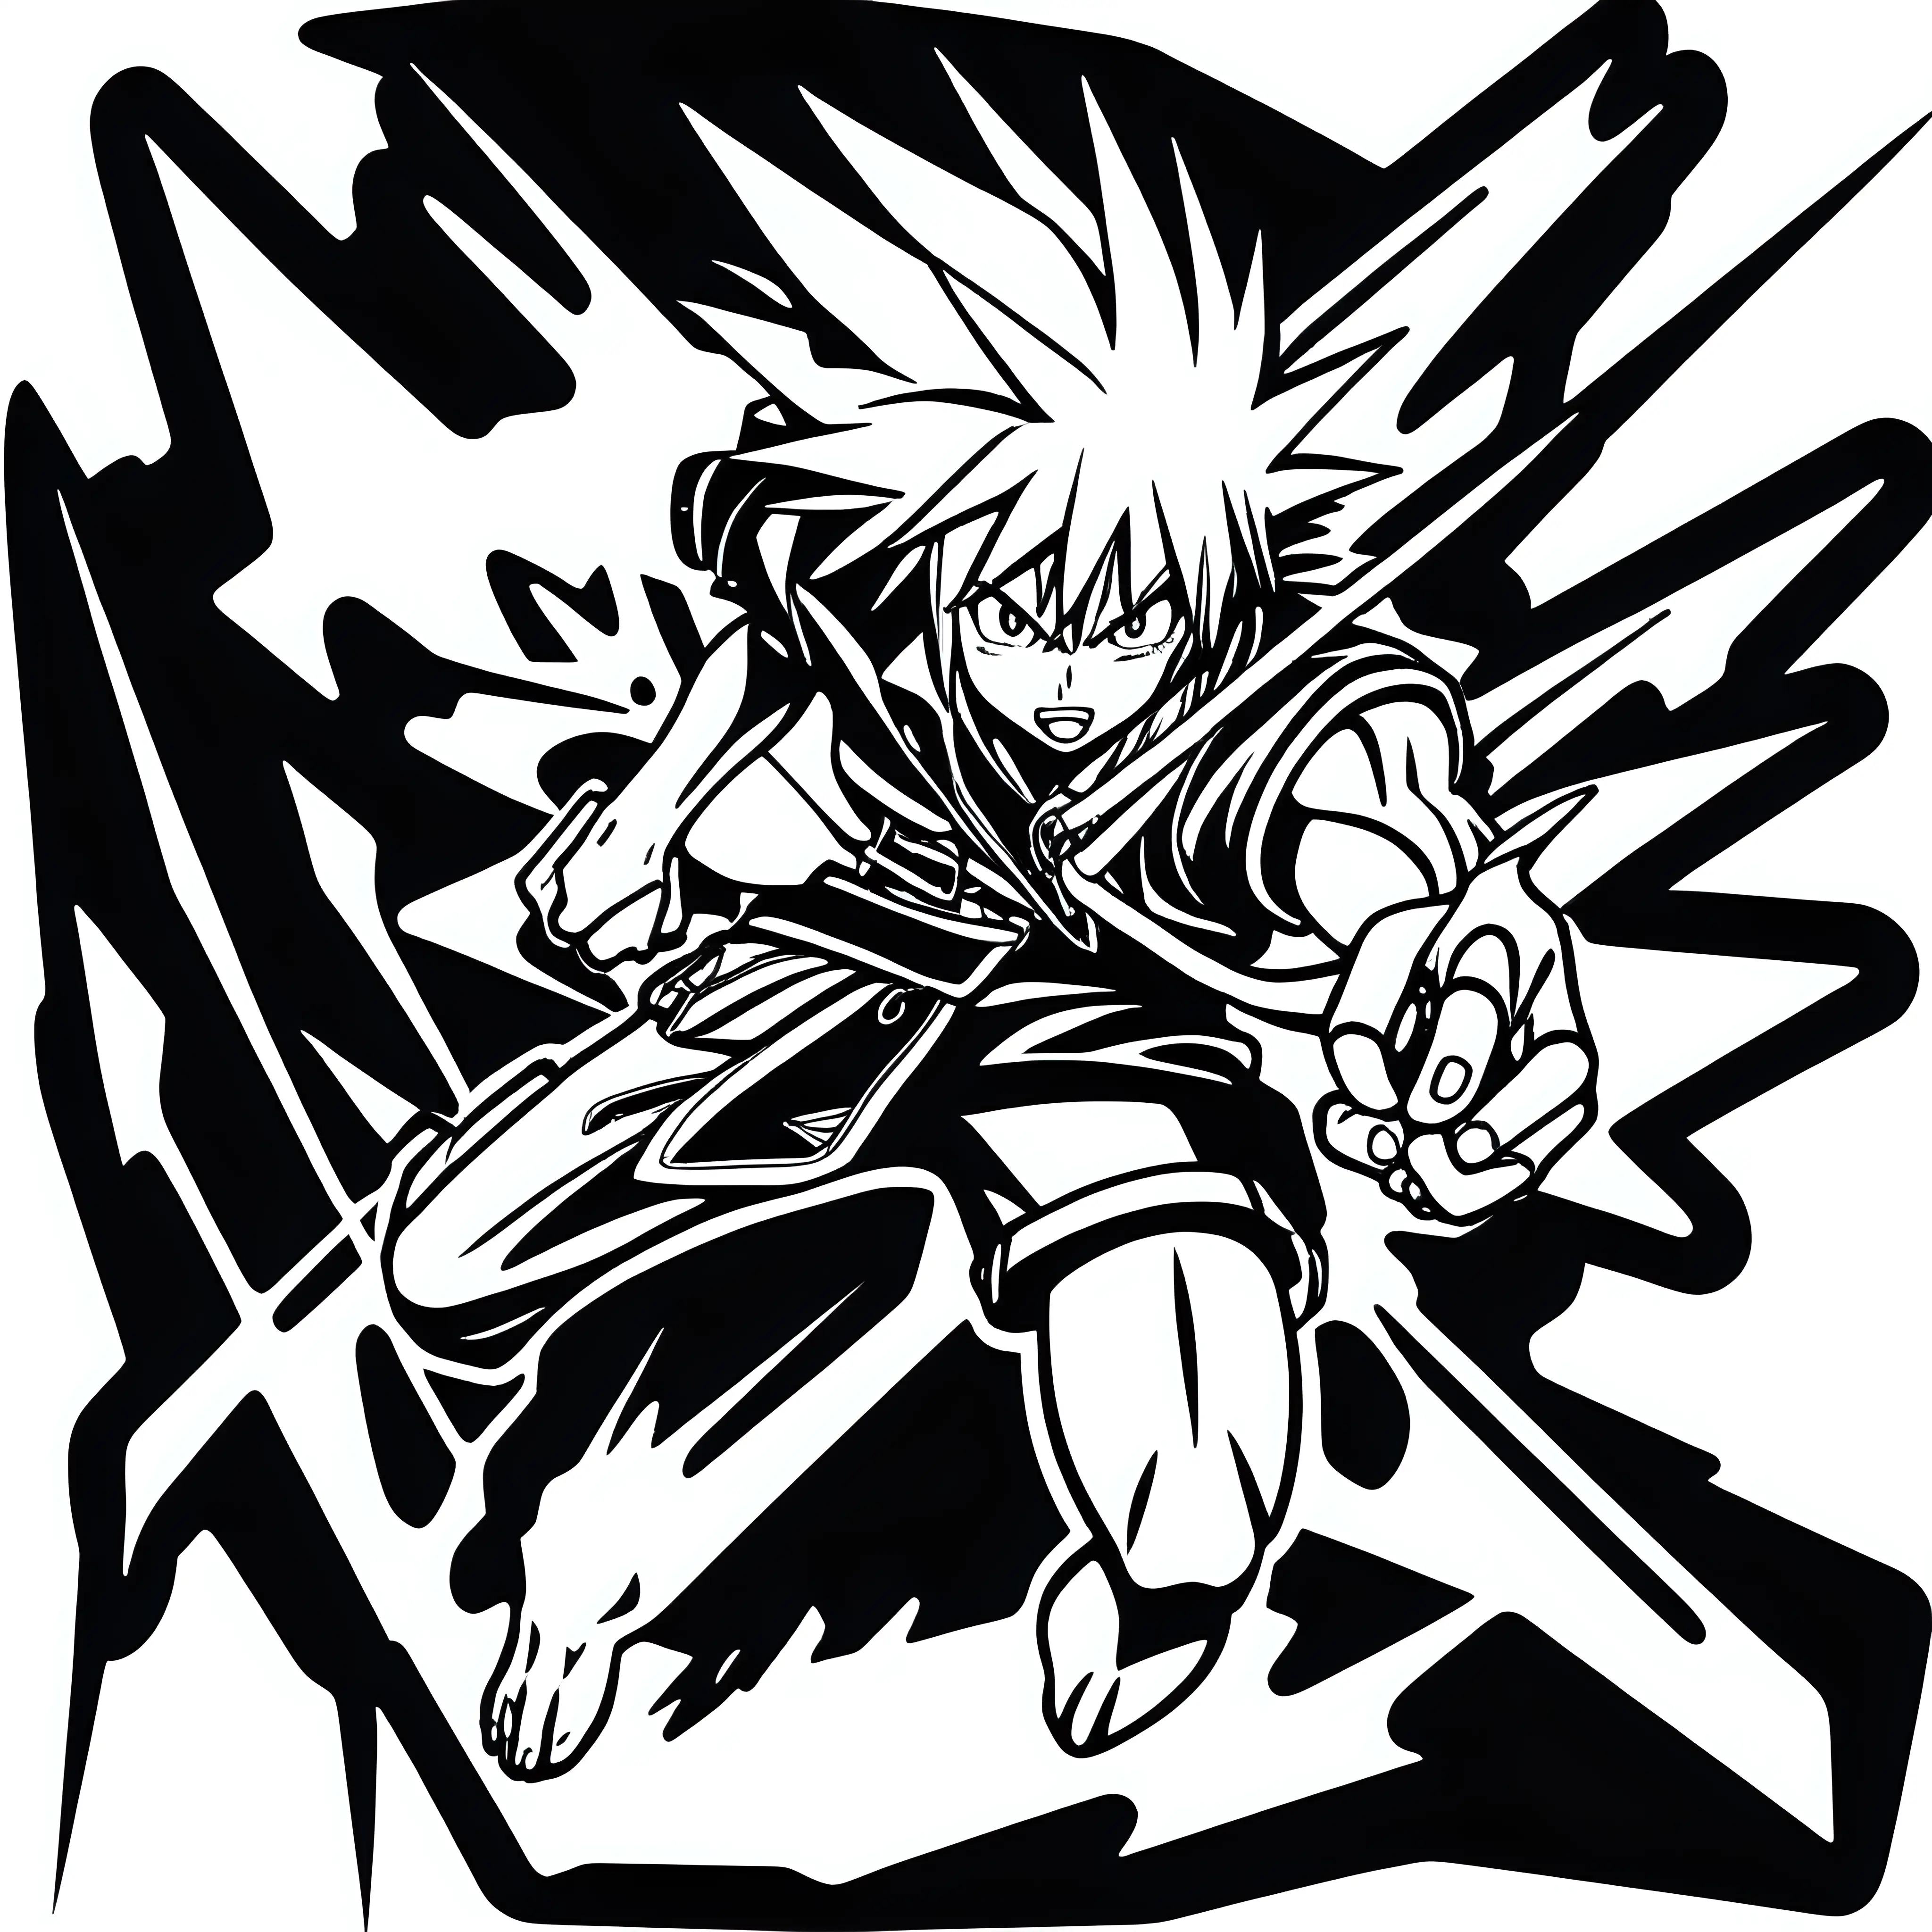 Dynamic Anime Character in Aggressive Attack Stance Vinyl Sticker Art